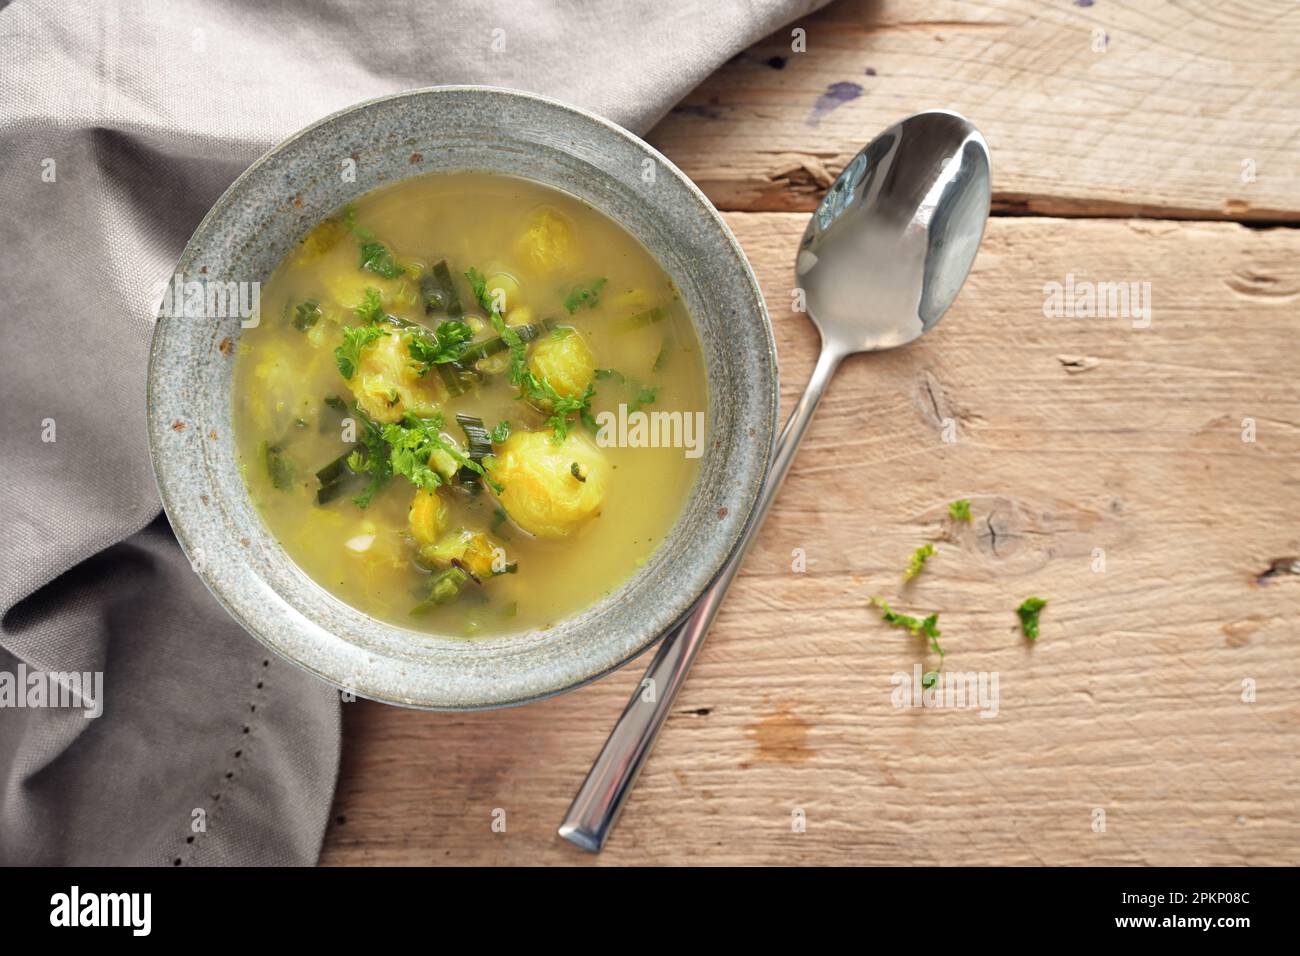 Vegetable soup with brussels sprout, leek and potato in a bowl, spoon and napkin on a rustic wooden table, high angle view from above, copy space, sel Stock Photo